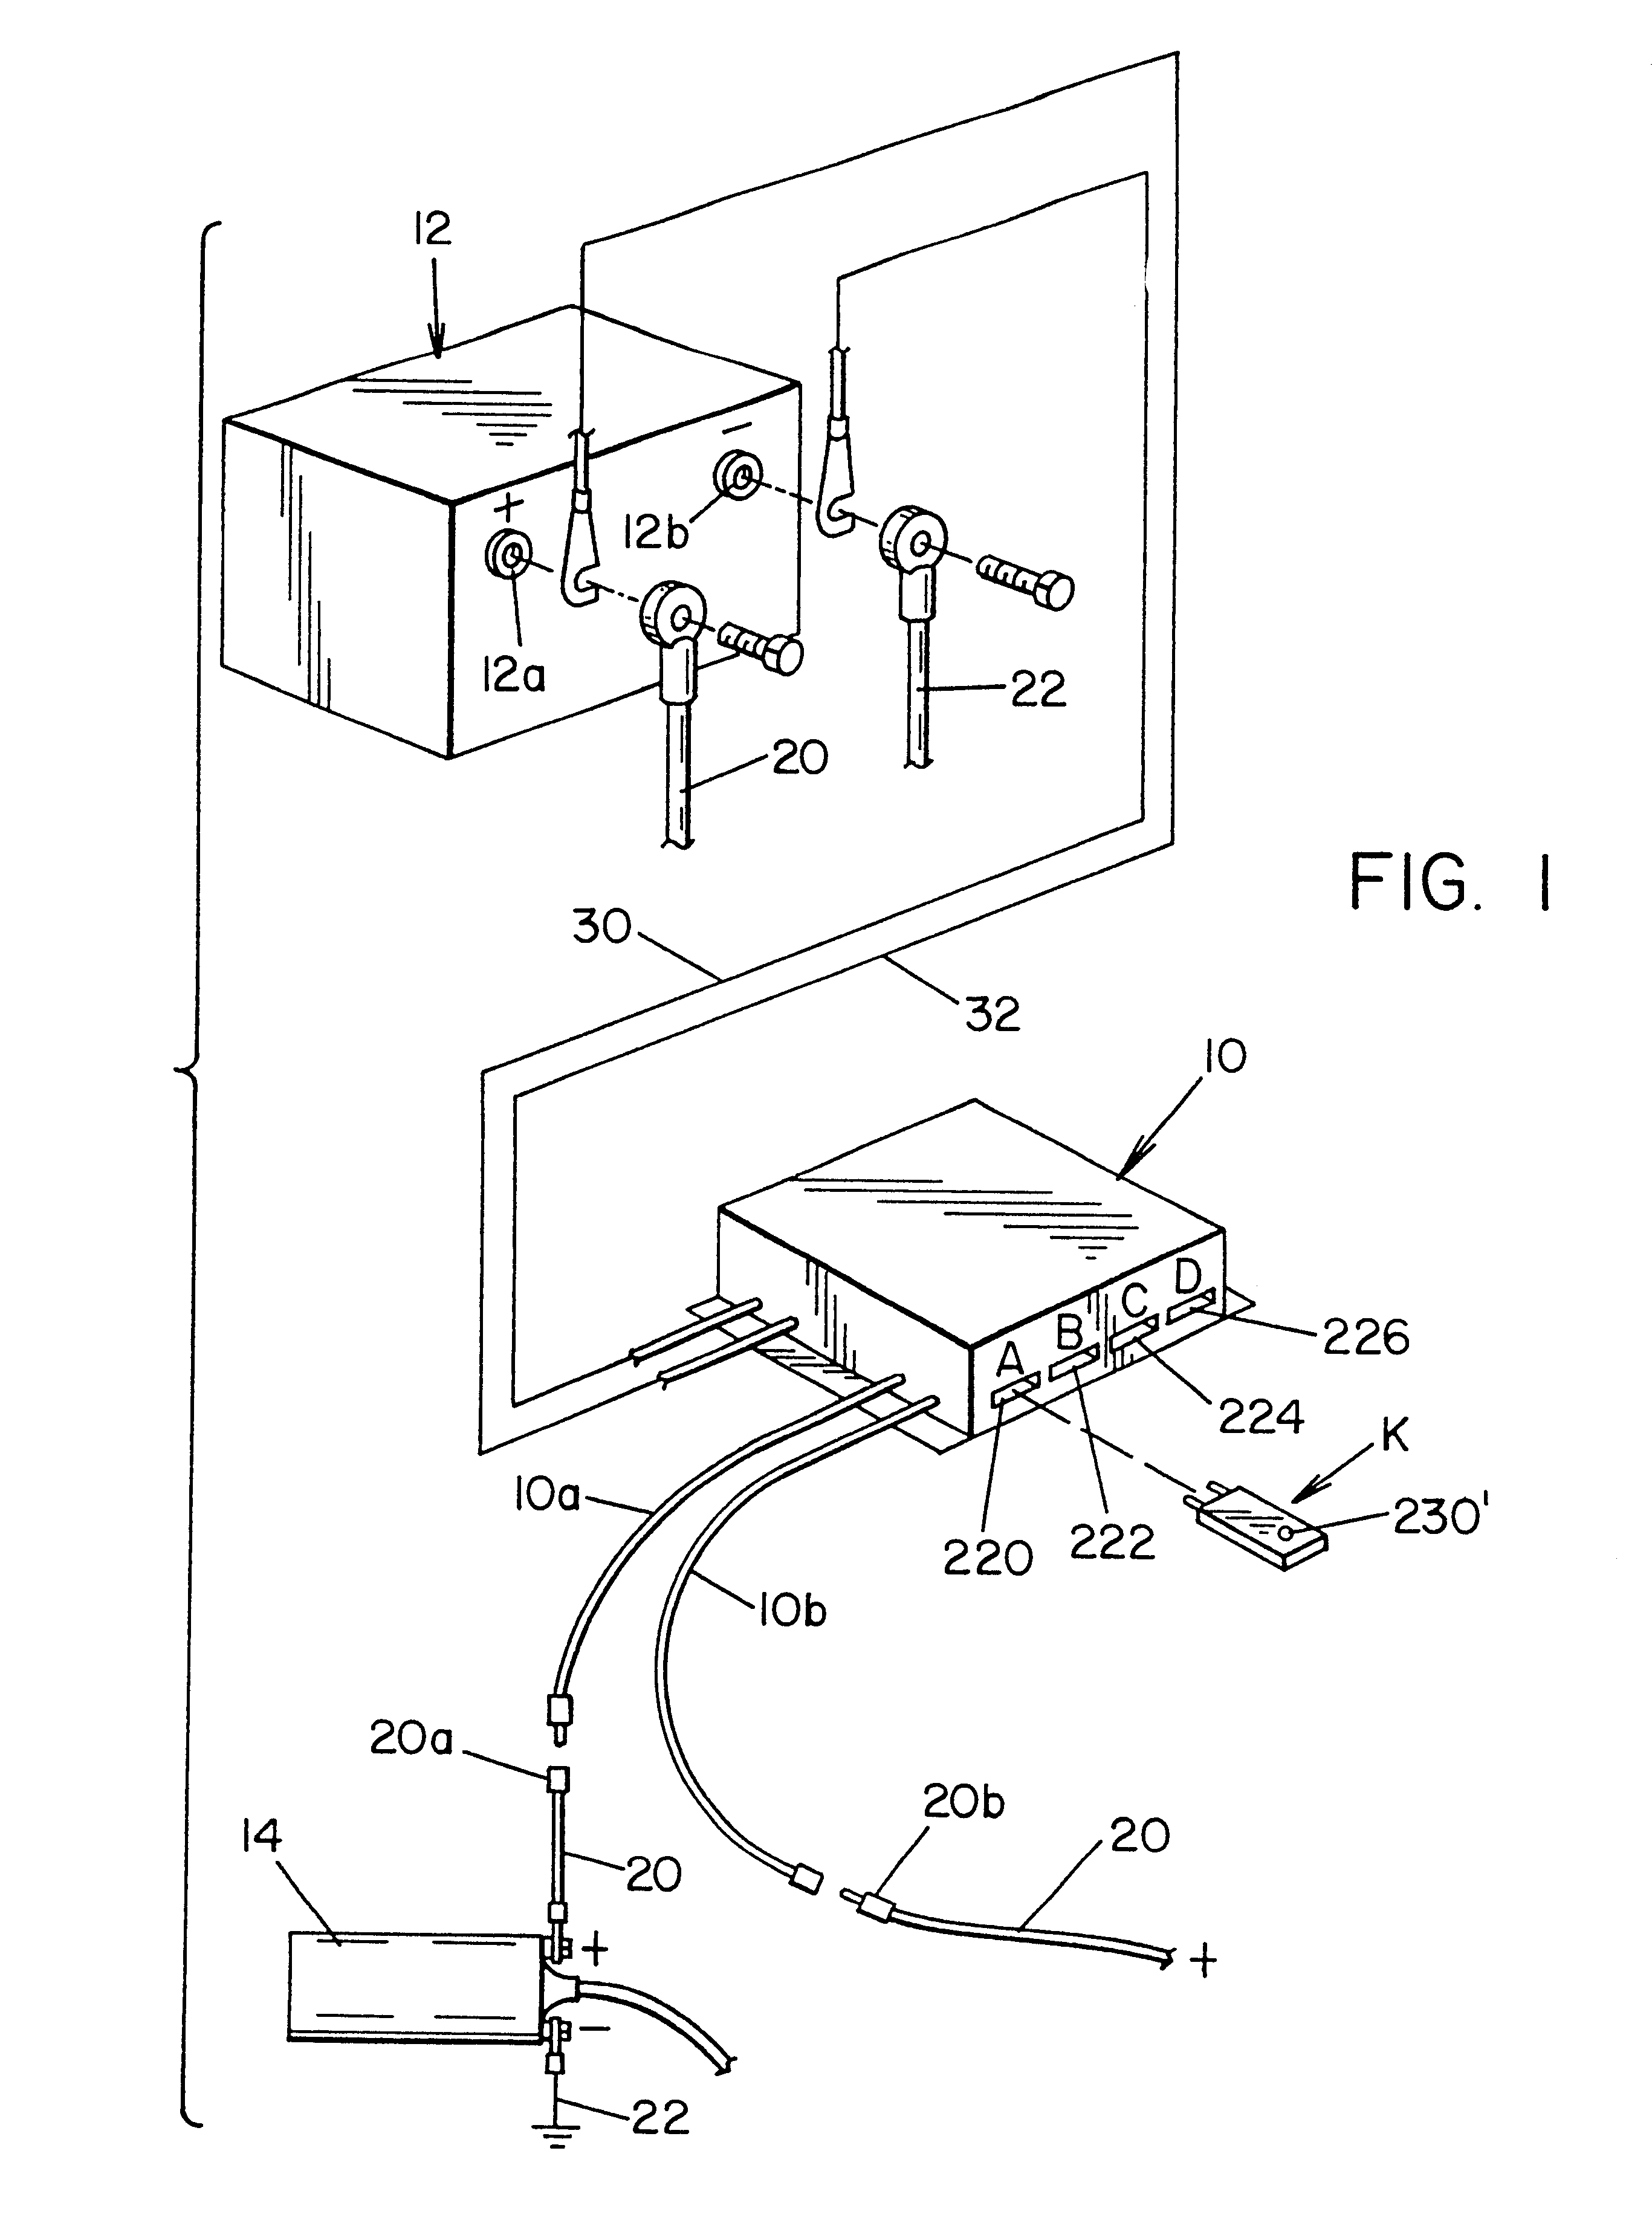 Anti-theft device for motor vehicles